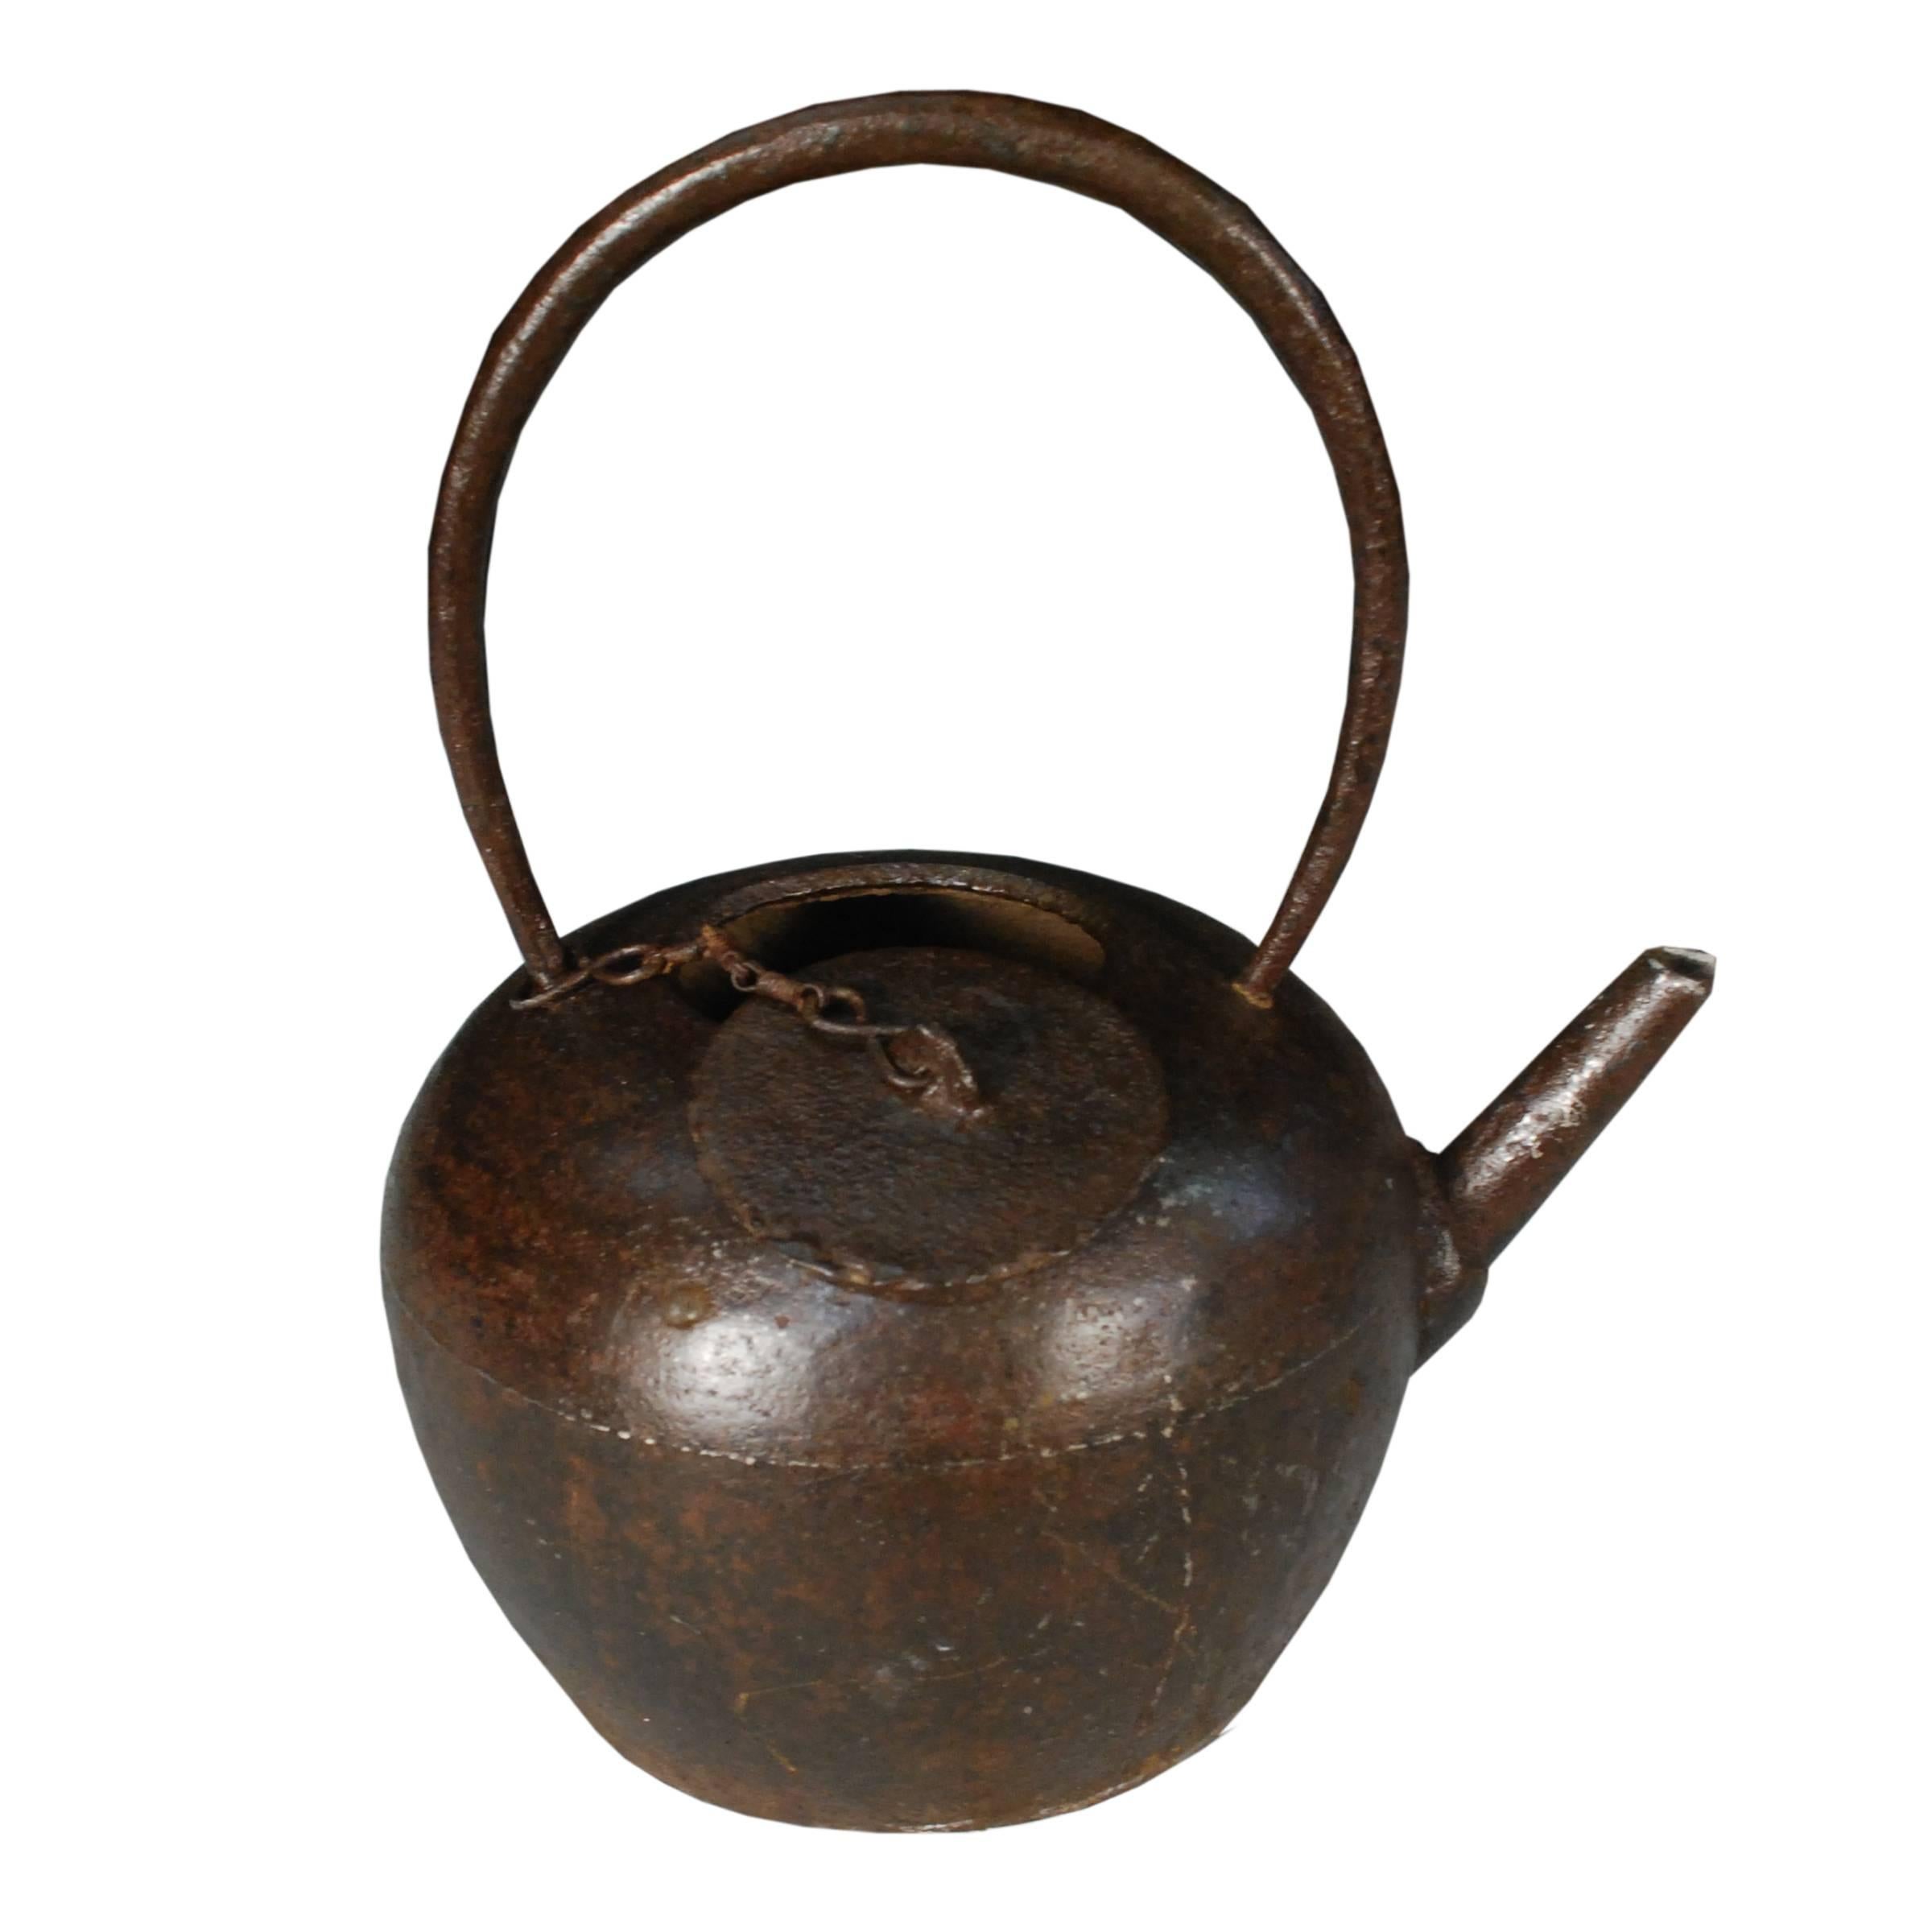 This round sculptural iron teapot was cast in Northern China during the late Qing dynasty. Earlier teapots were generally large, but connoisseurs eventually discovered that smaller pots, like this one, hold the aroma of tea better and stop the